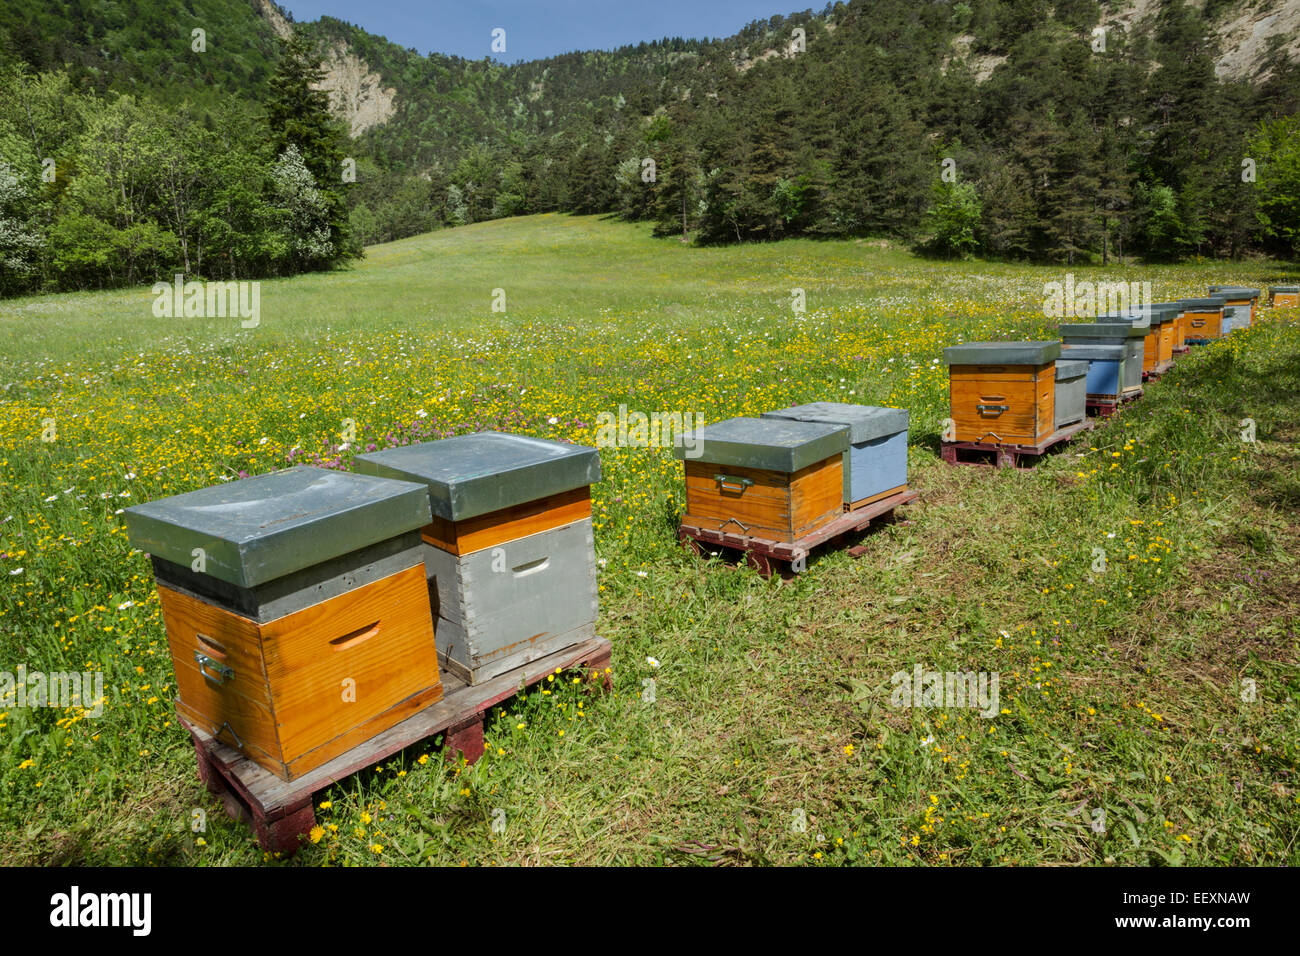 France Isere Parc Naturel Regional du Vercors (Vercors Natural Regional Park) bee hives in a wildflower hay meadow Stock Photo